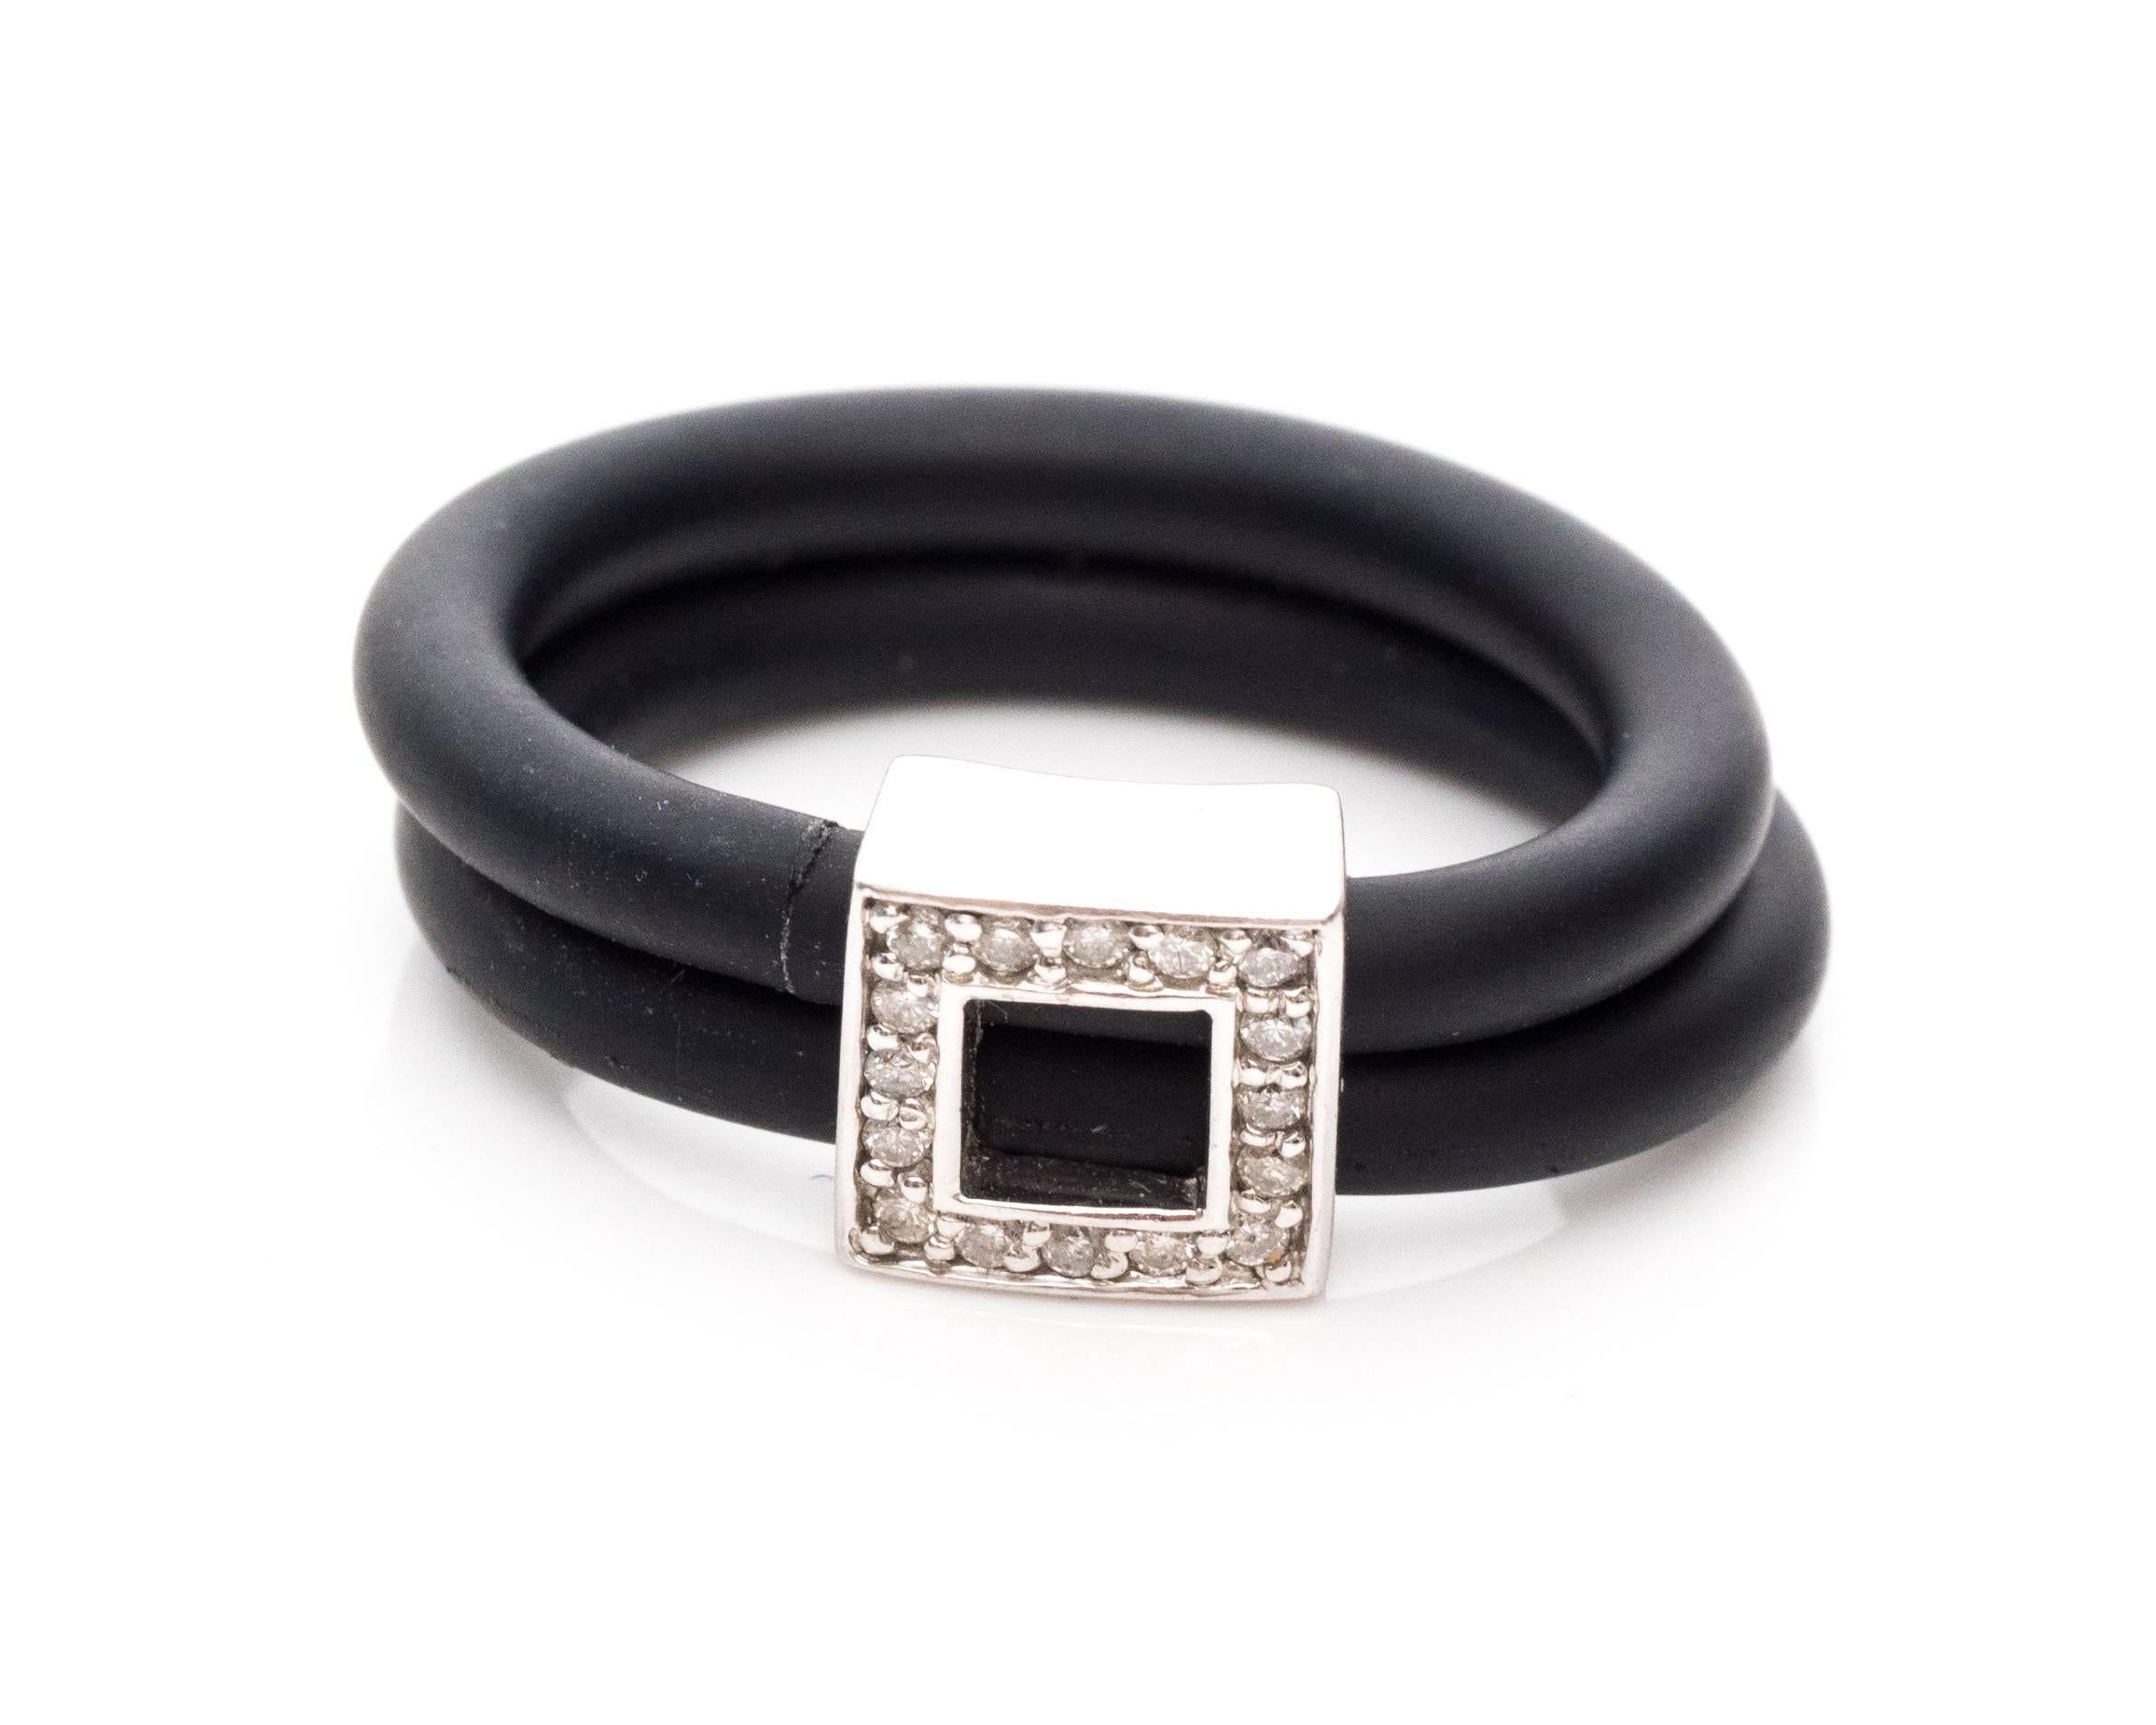 This is a black rubber belt buckle shaped ring with an accent of white gold and diamonds on the buckle frame. This Italian made ring will make a great accessory for everyday wear. The diamonds are inlayed in a white gold frame with a cutout to make